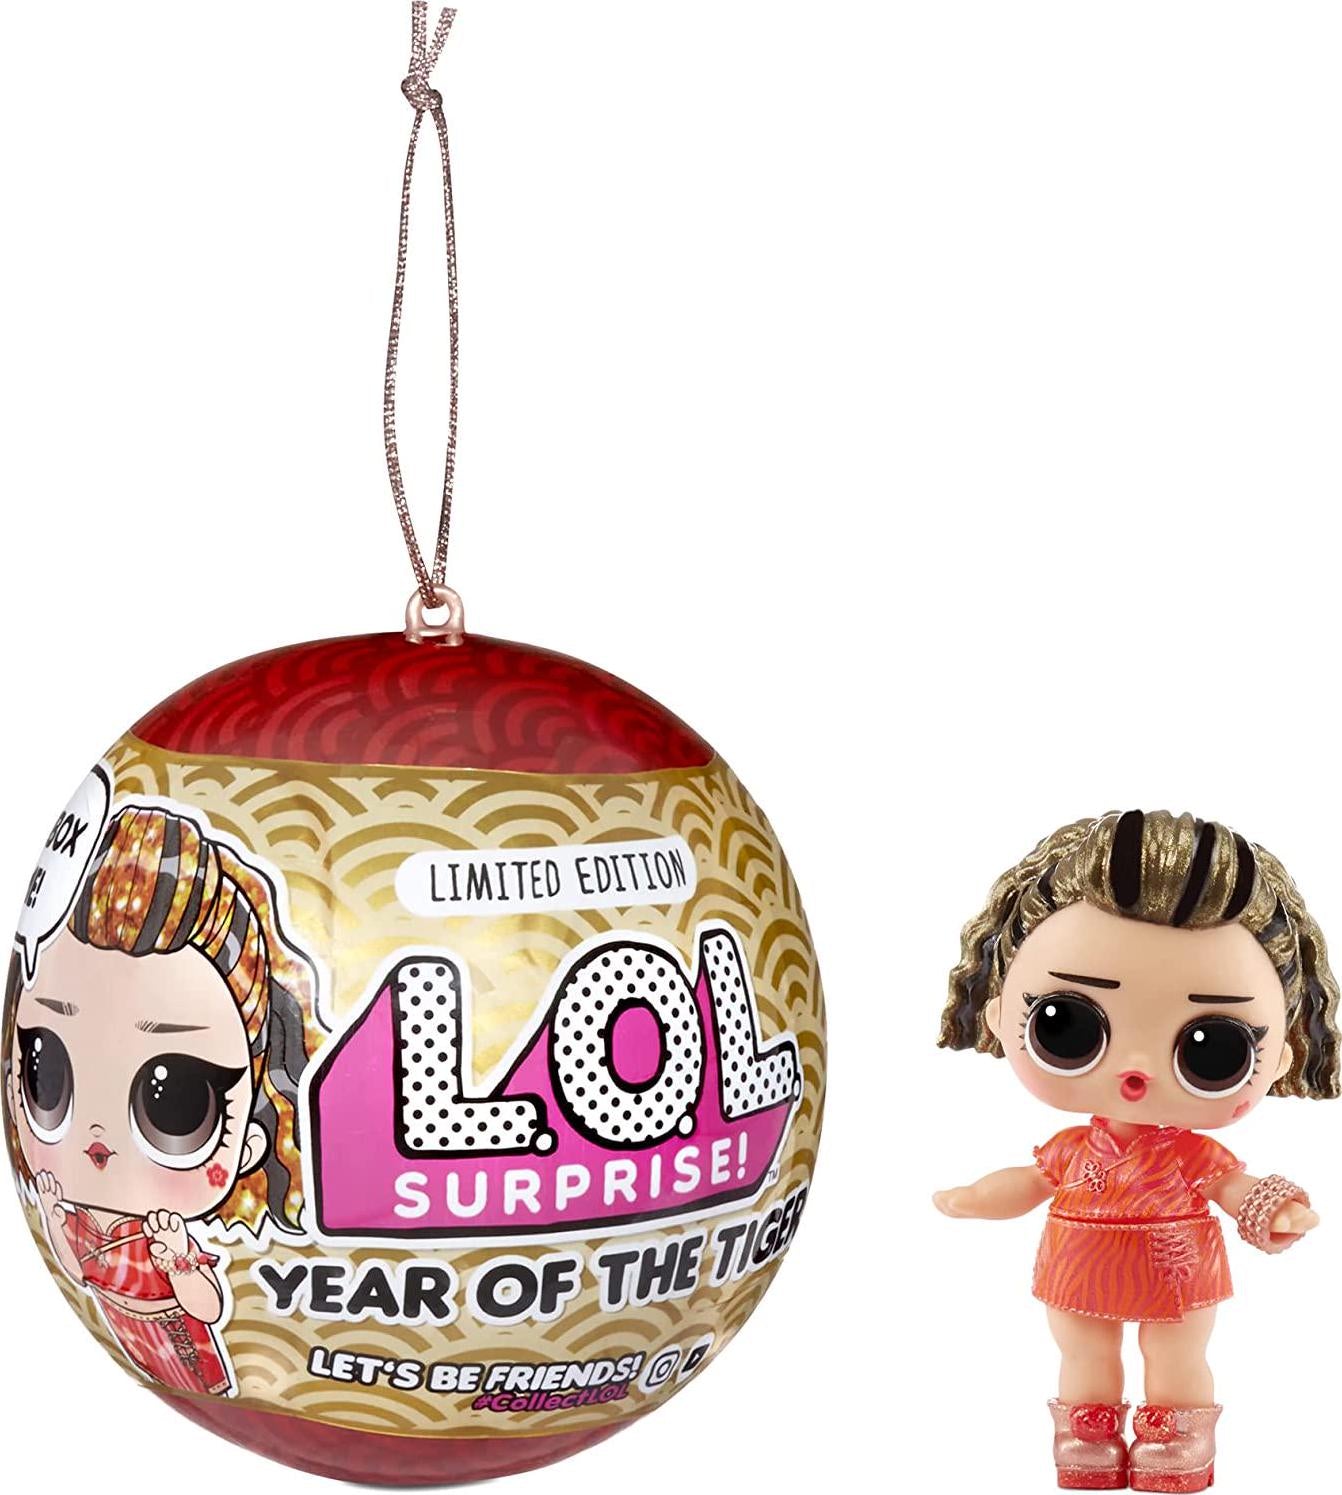 L.O.L. Surprise, L.O.L. Surprise! Year of The Tiger Doll Good Wishes Baby with 8 Surprises, Lunar New Year Doll, Accessories, Limited Edition Doll, Multicolor, (581376)